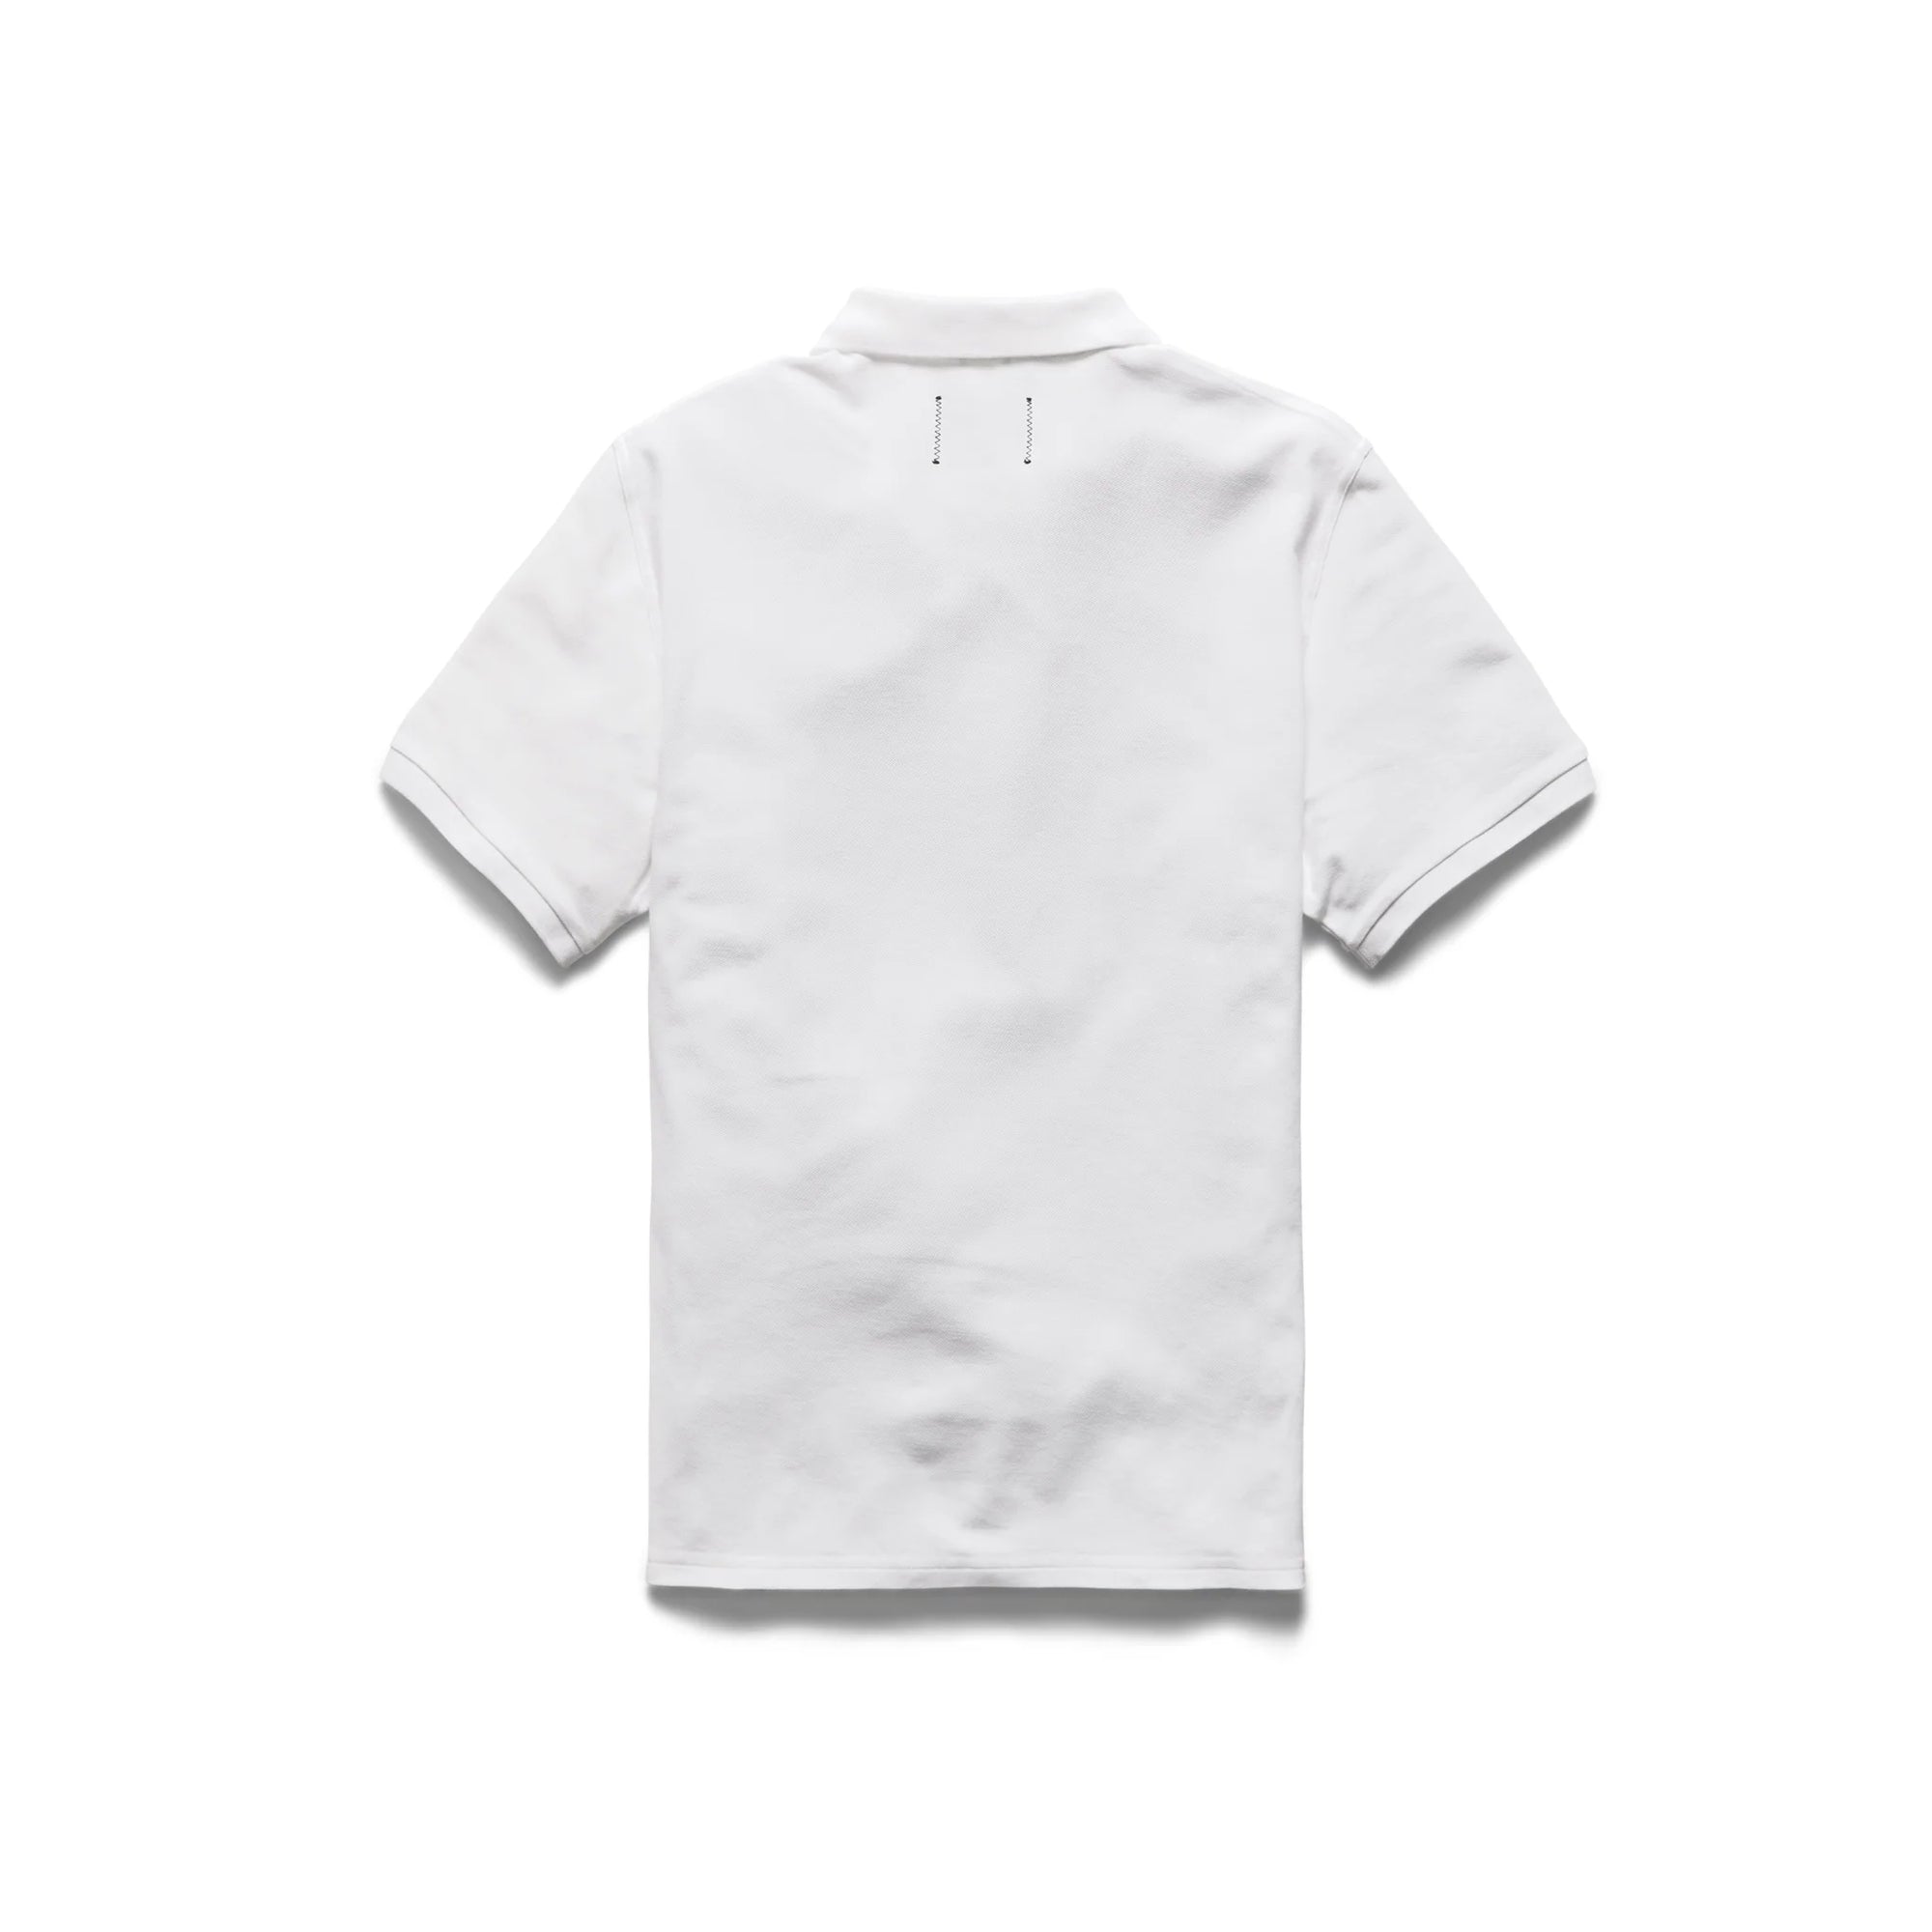 Reigning Champ Classic Pique Polo in White